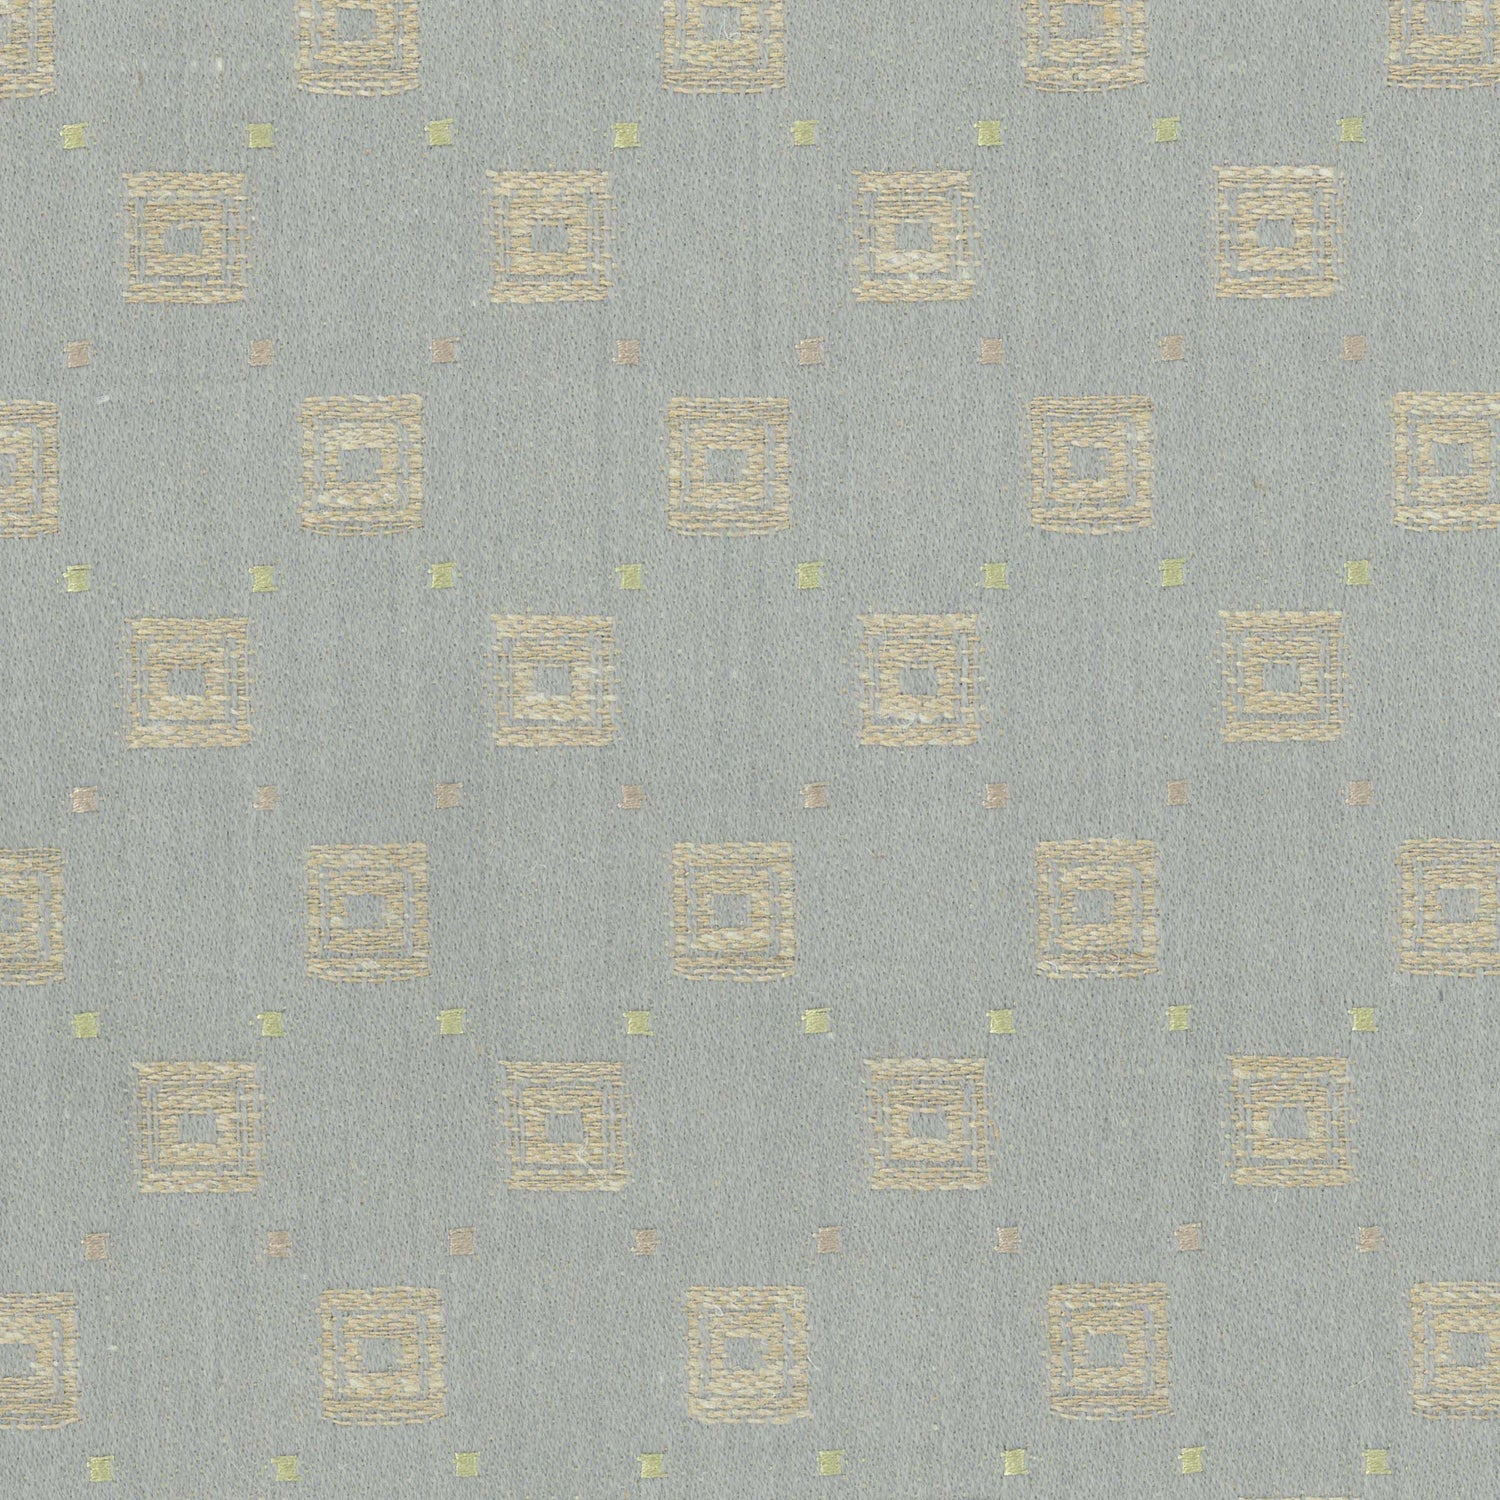 Livingston fabric in heather color - pattern number RV 00011469 - by Scalamandre in the Old World Weavers collection